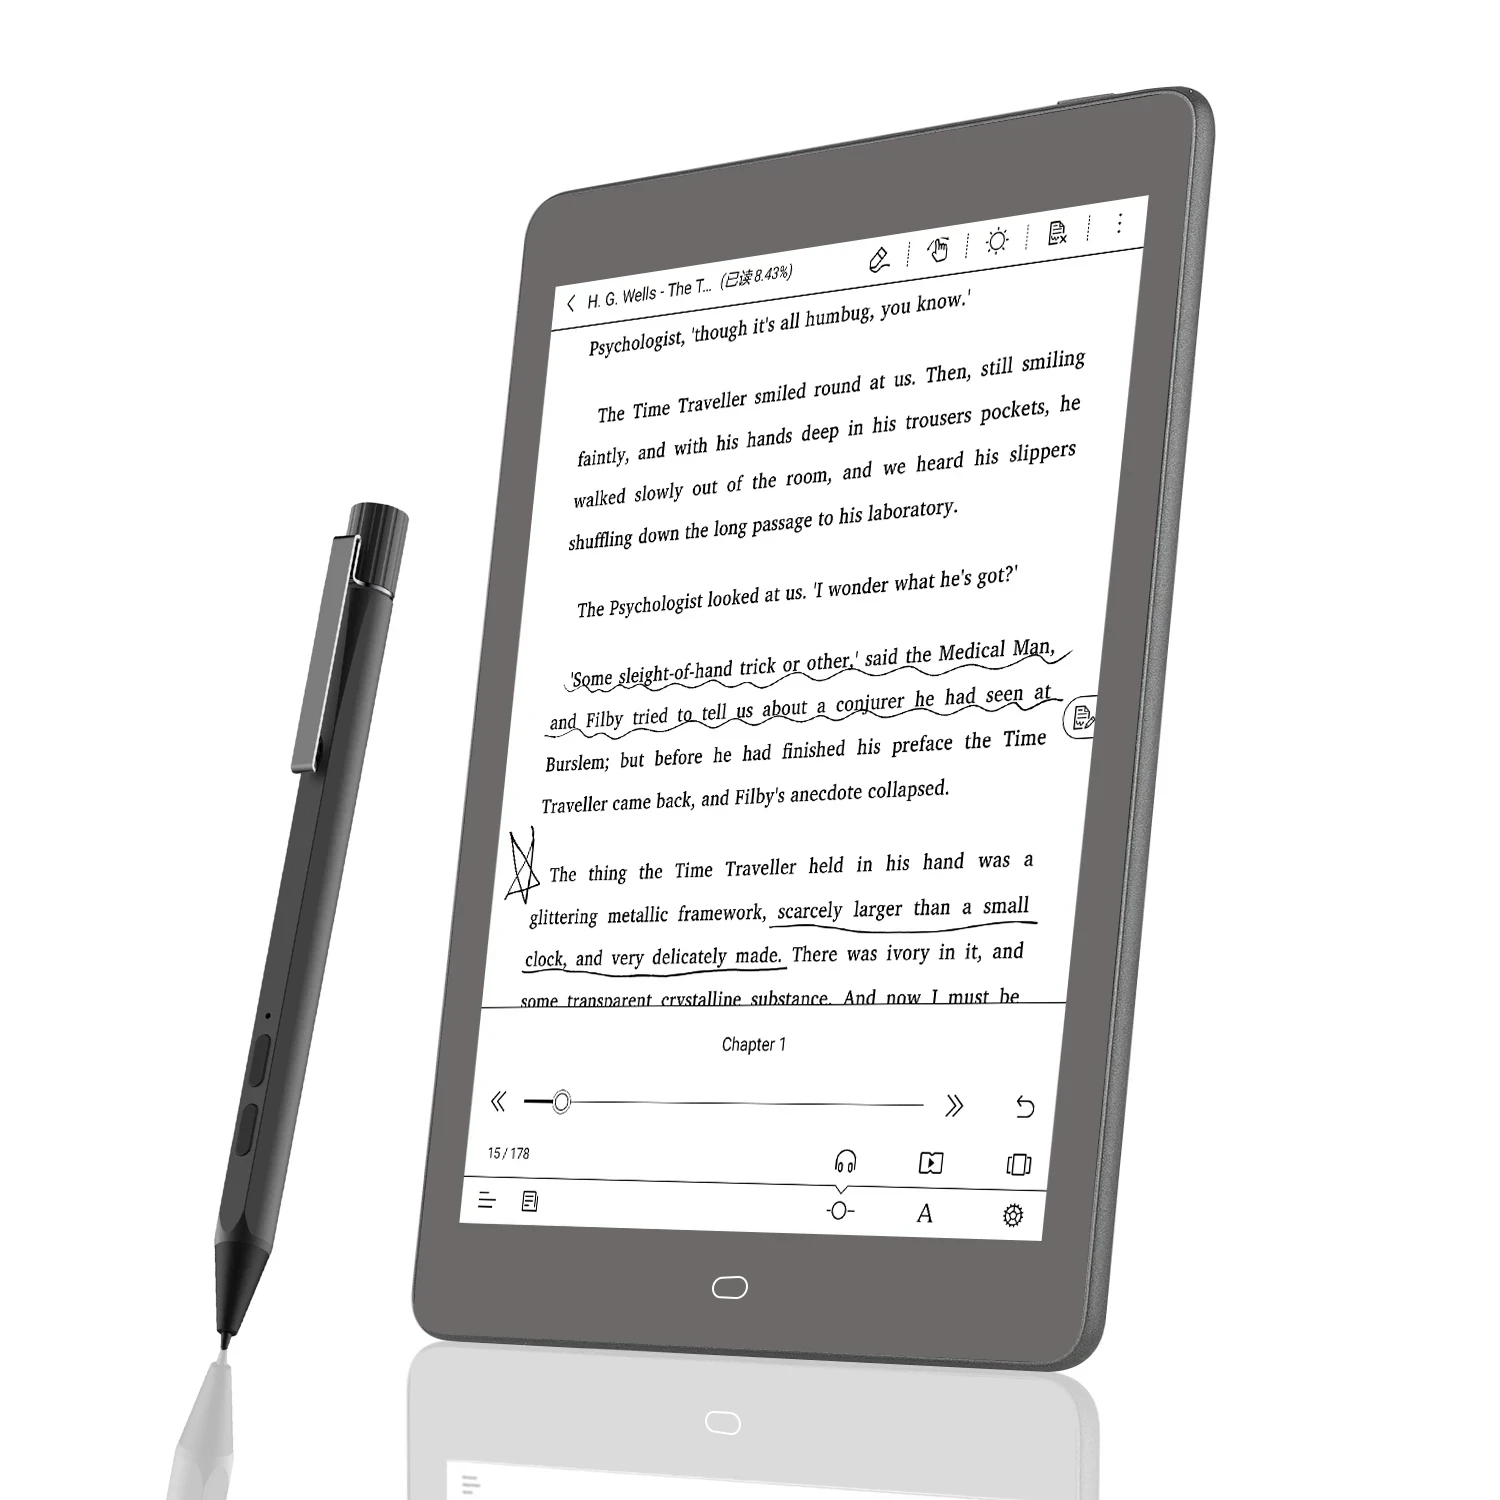 

NEW Arrival likebook P78 7.8 Android Ebook reader 2G/32GB flat bezel Design with SD card to 256GB